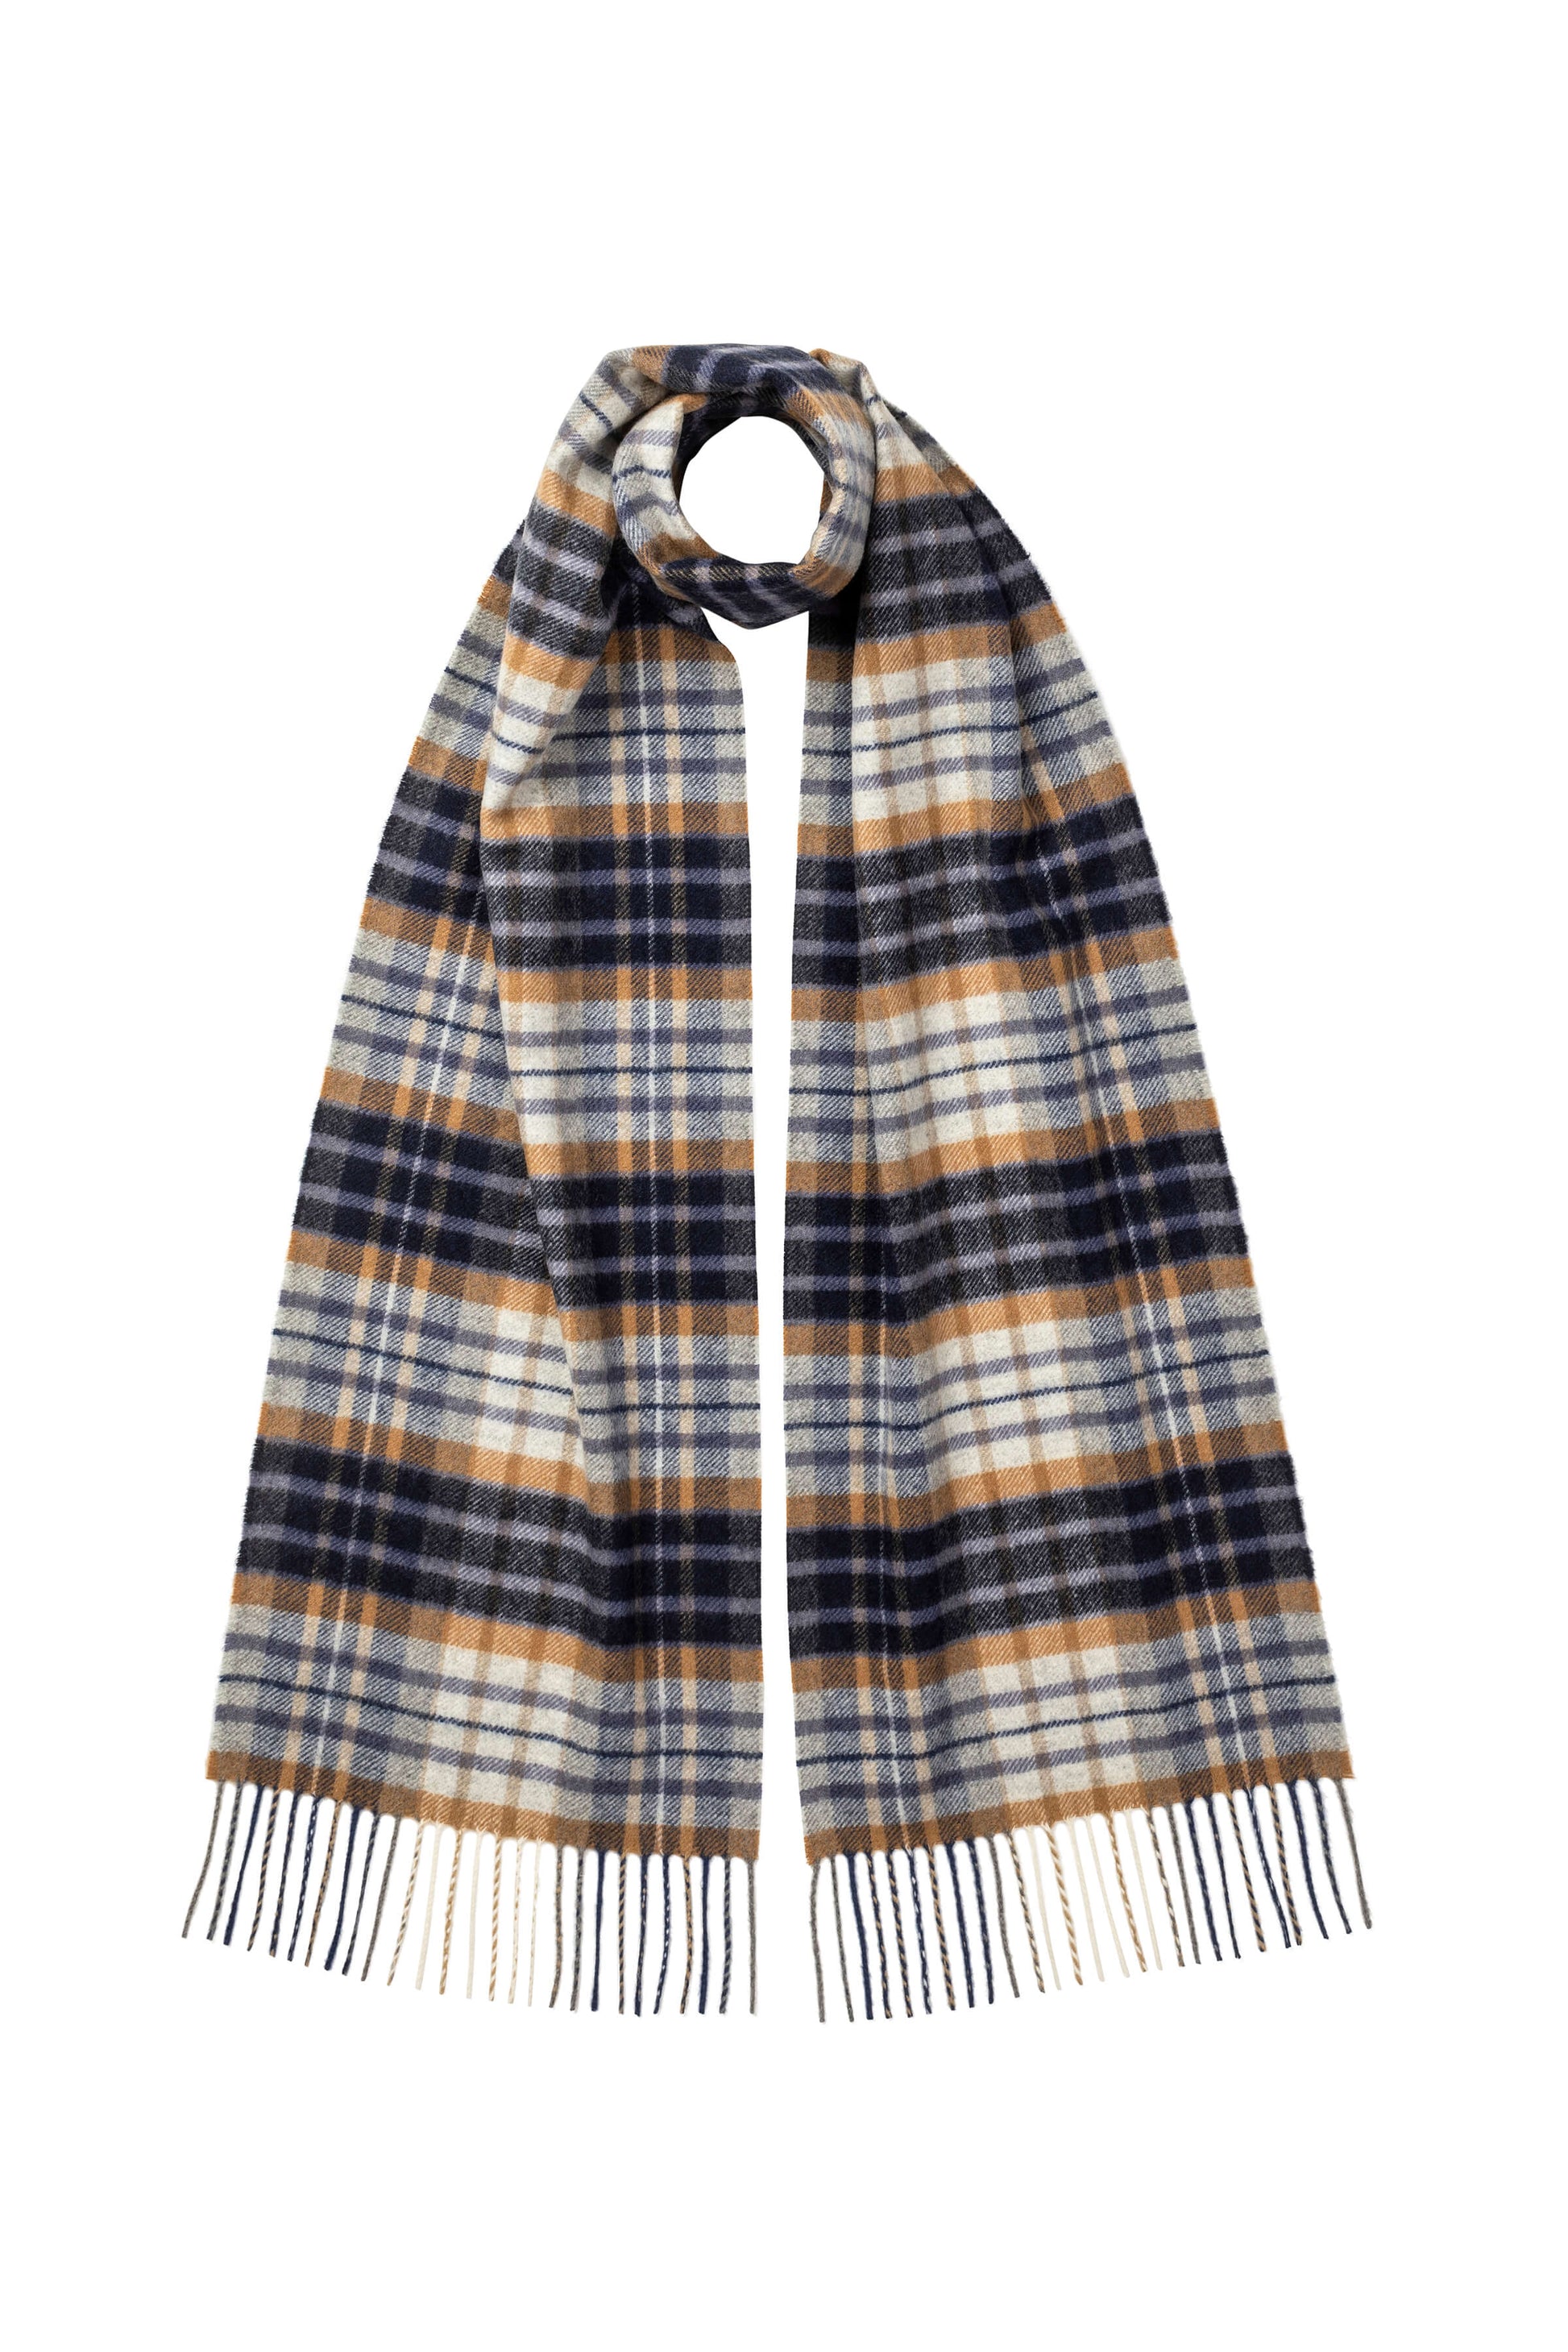 Johnstons of Elgin AW24 Woven Accessory House Check Cashmere Scarf WA000016RU6933ONE